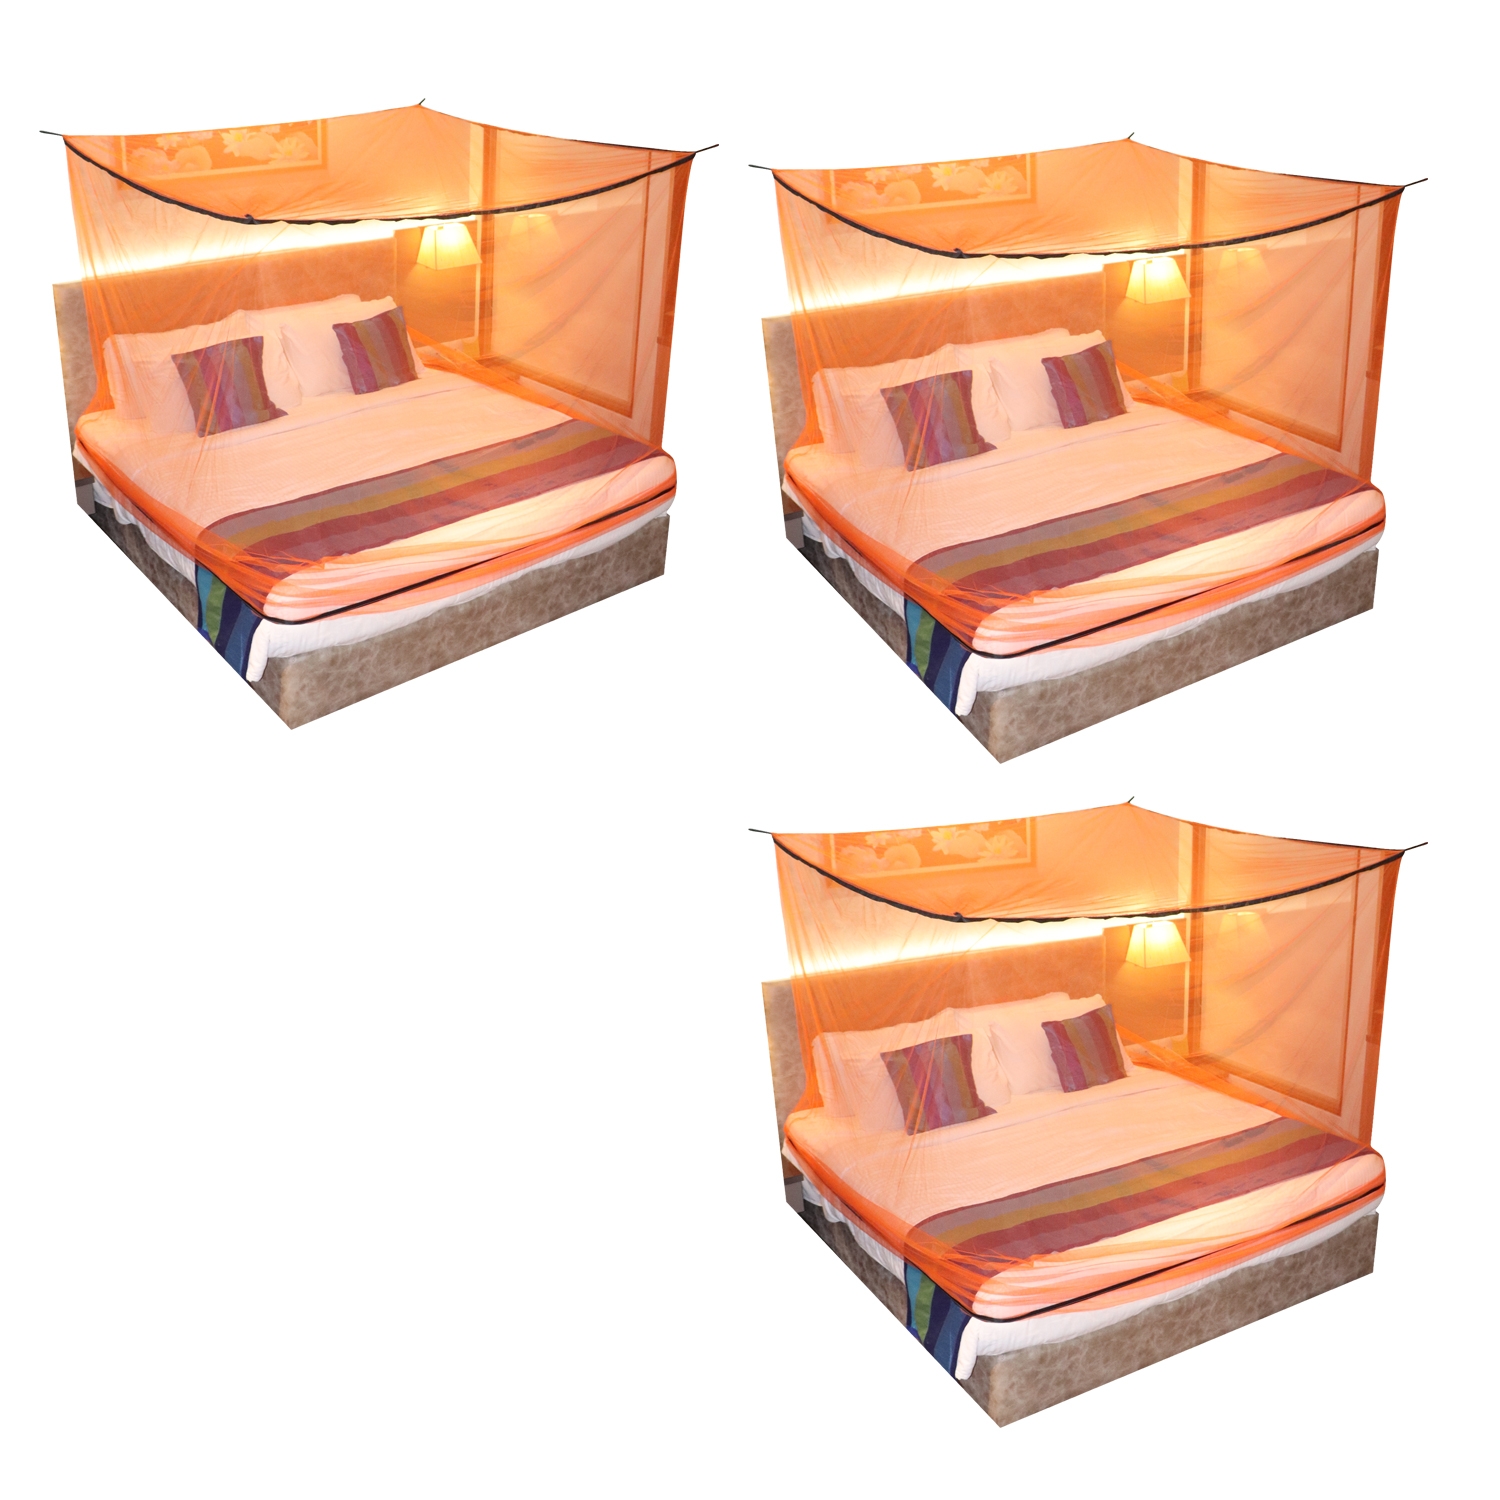 SILVER SHINE | Mosquito Net for Double Bed, King-Size, Square Hanging Foldable Polyester Net Orange And Black Pack of 3 3